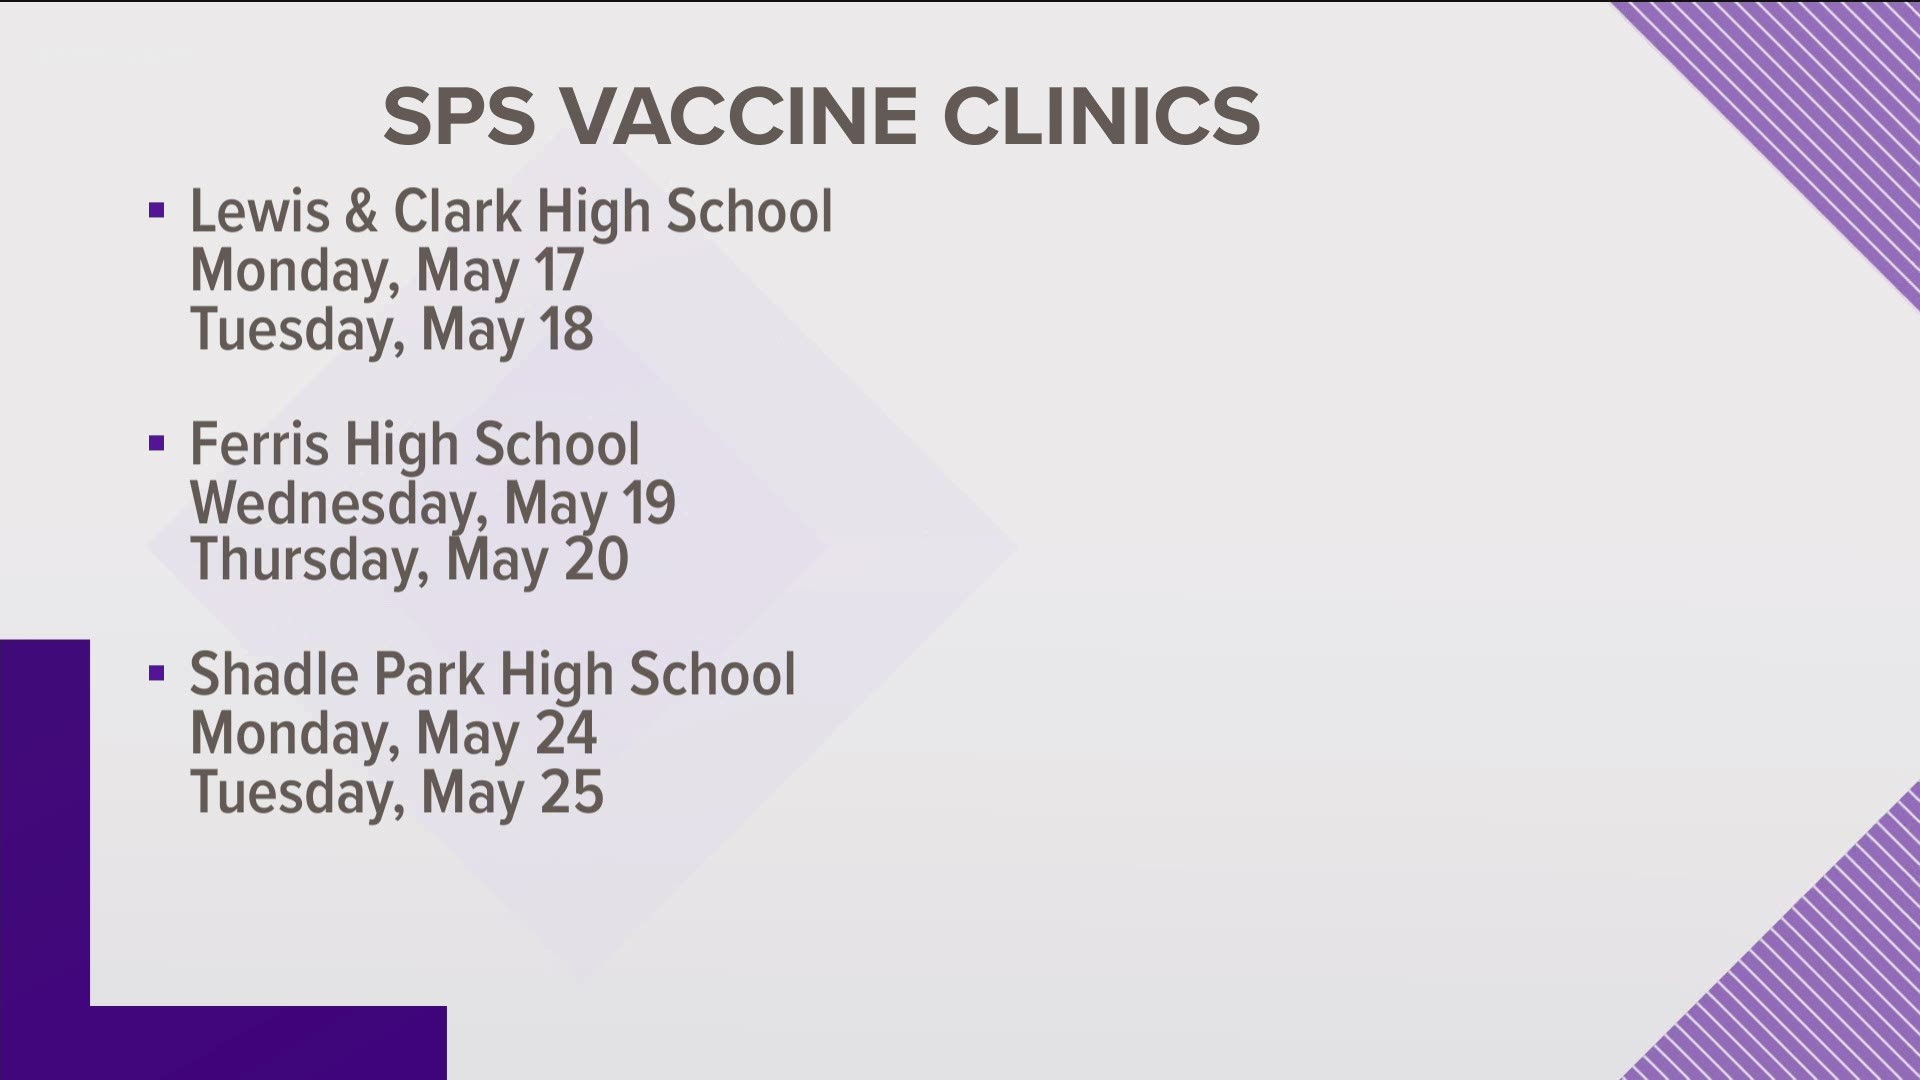 Five SPS high schools will turn into vaccination clinics in an effort to vaccinated children as young as 12 years of age.